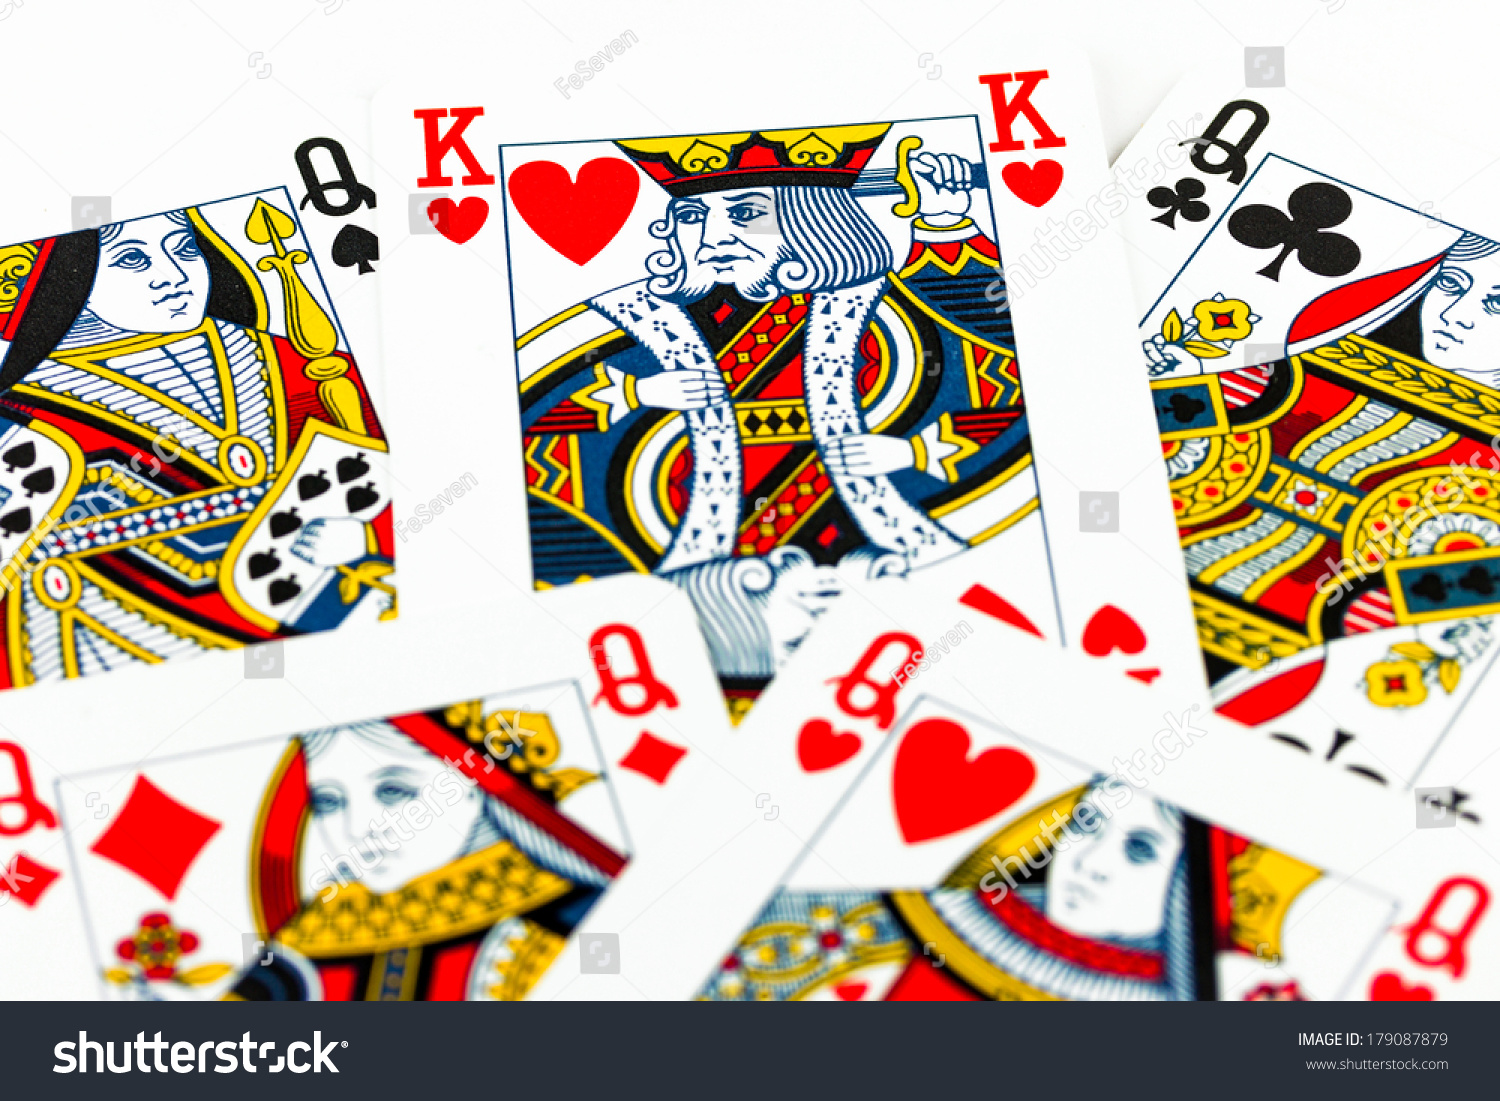 2 King Surrounded Sexy Images, Stock Photos & Vectors | Shutterstock